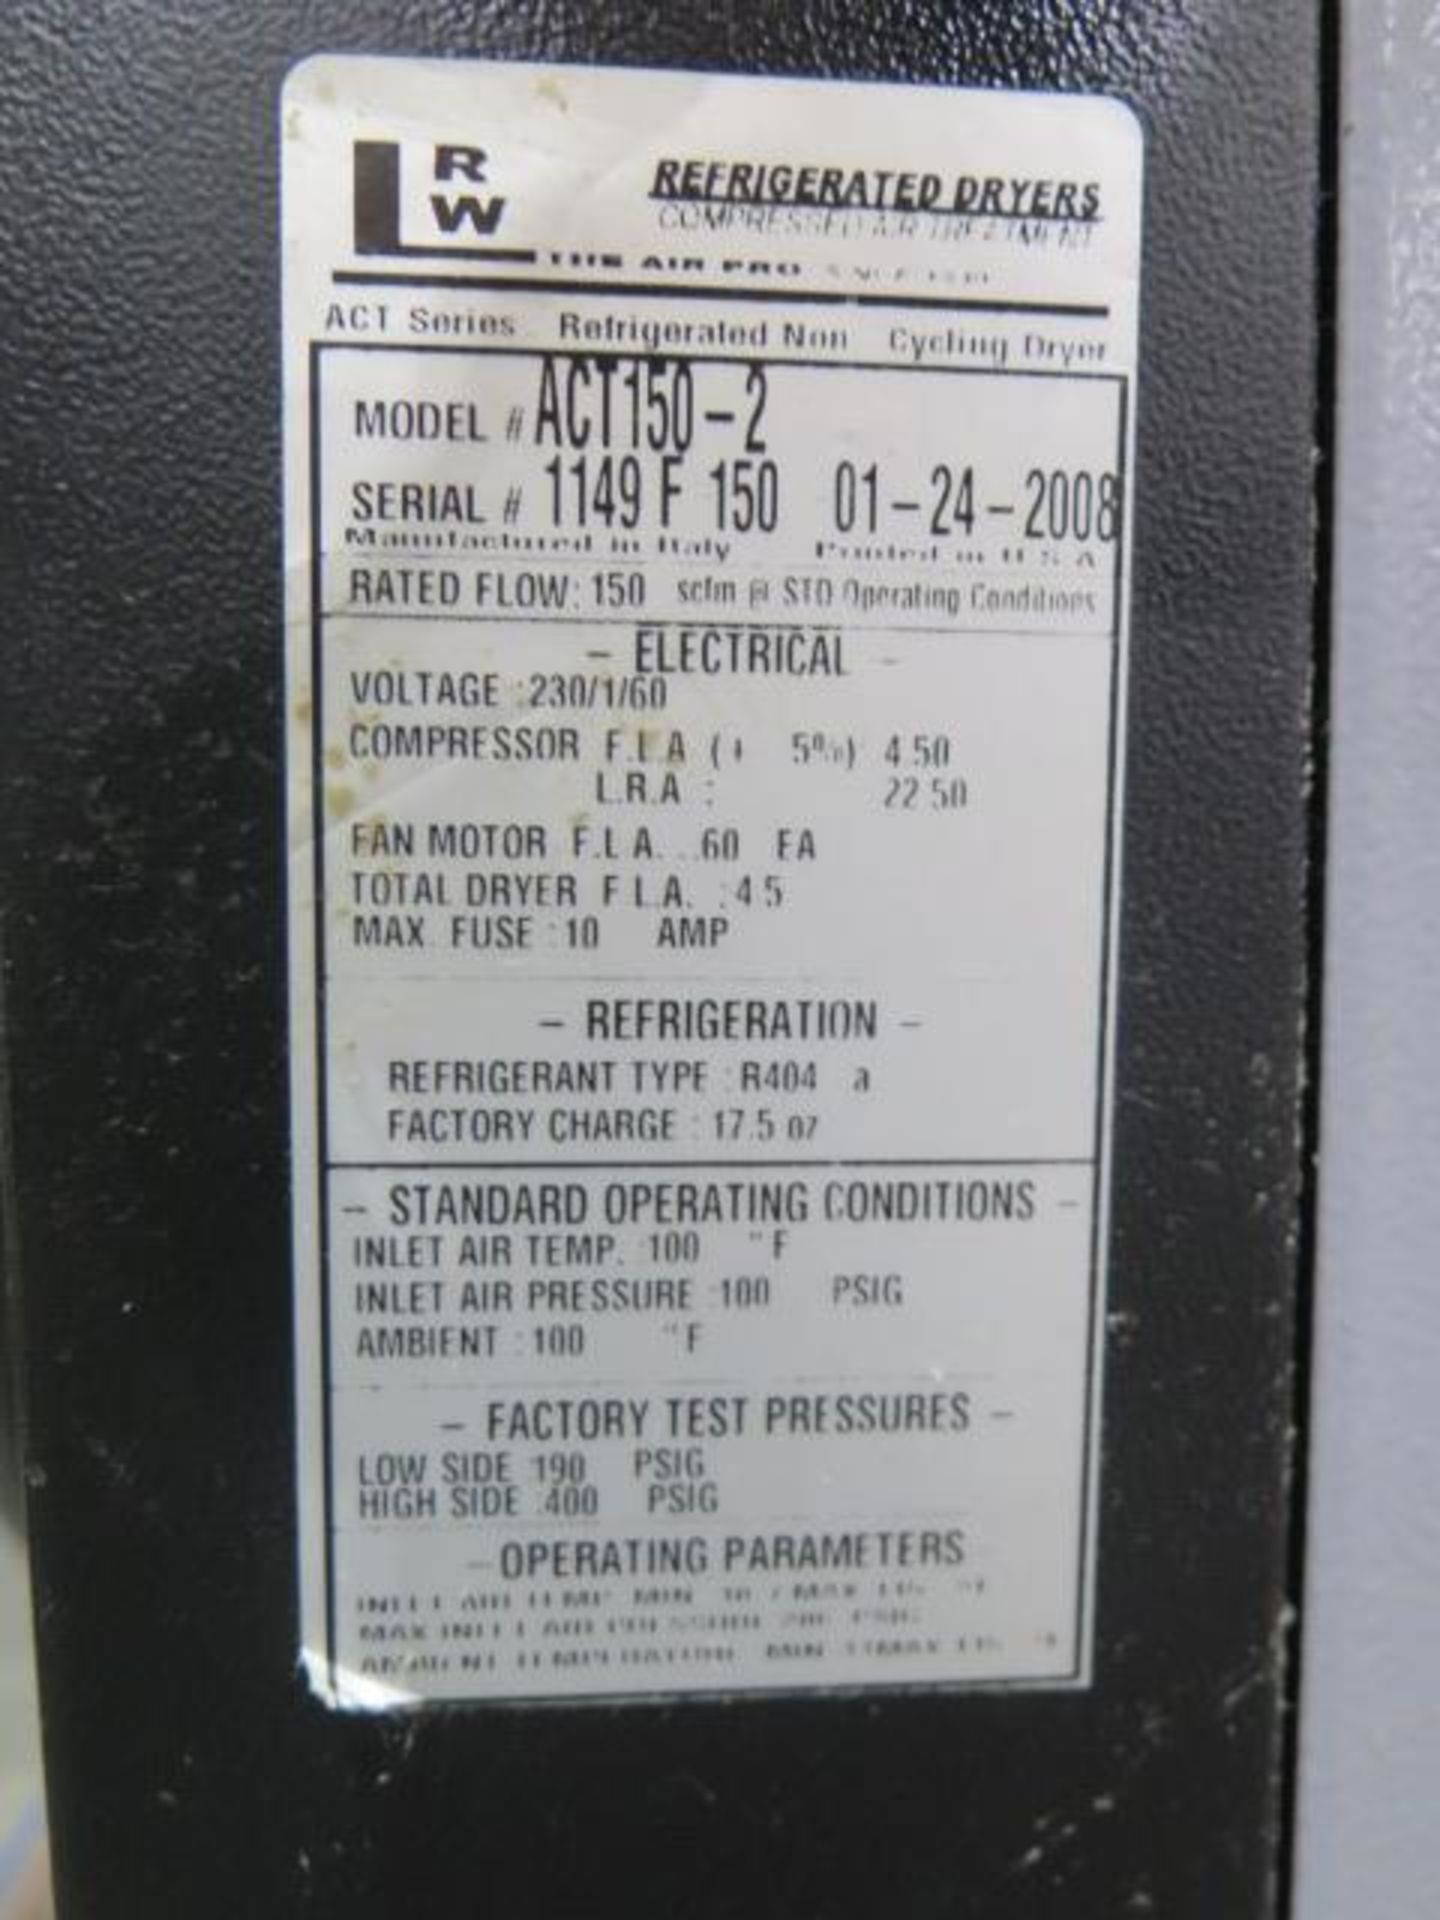 2008 LRW mdl. ACT150-2 Refrigerated Air Dryer s/n 1149F150 (SOLD AS-IS - NO WARRANTY) - Image 5 of 5